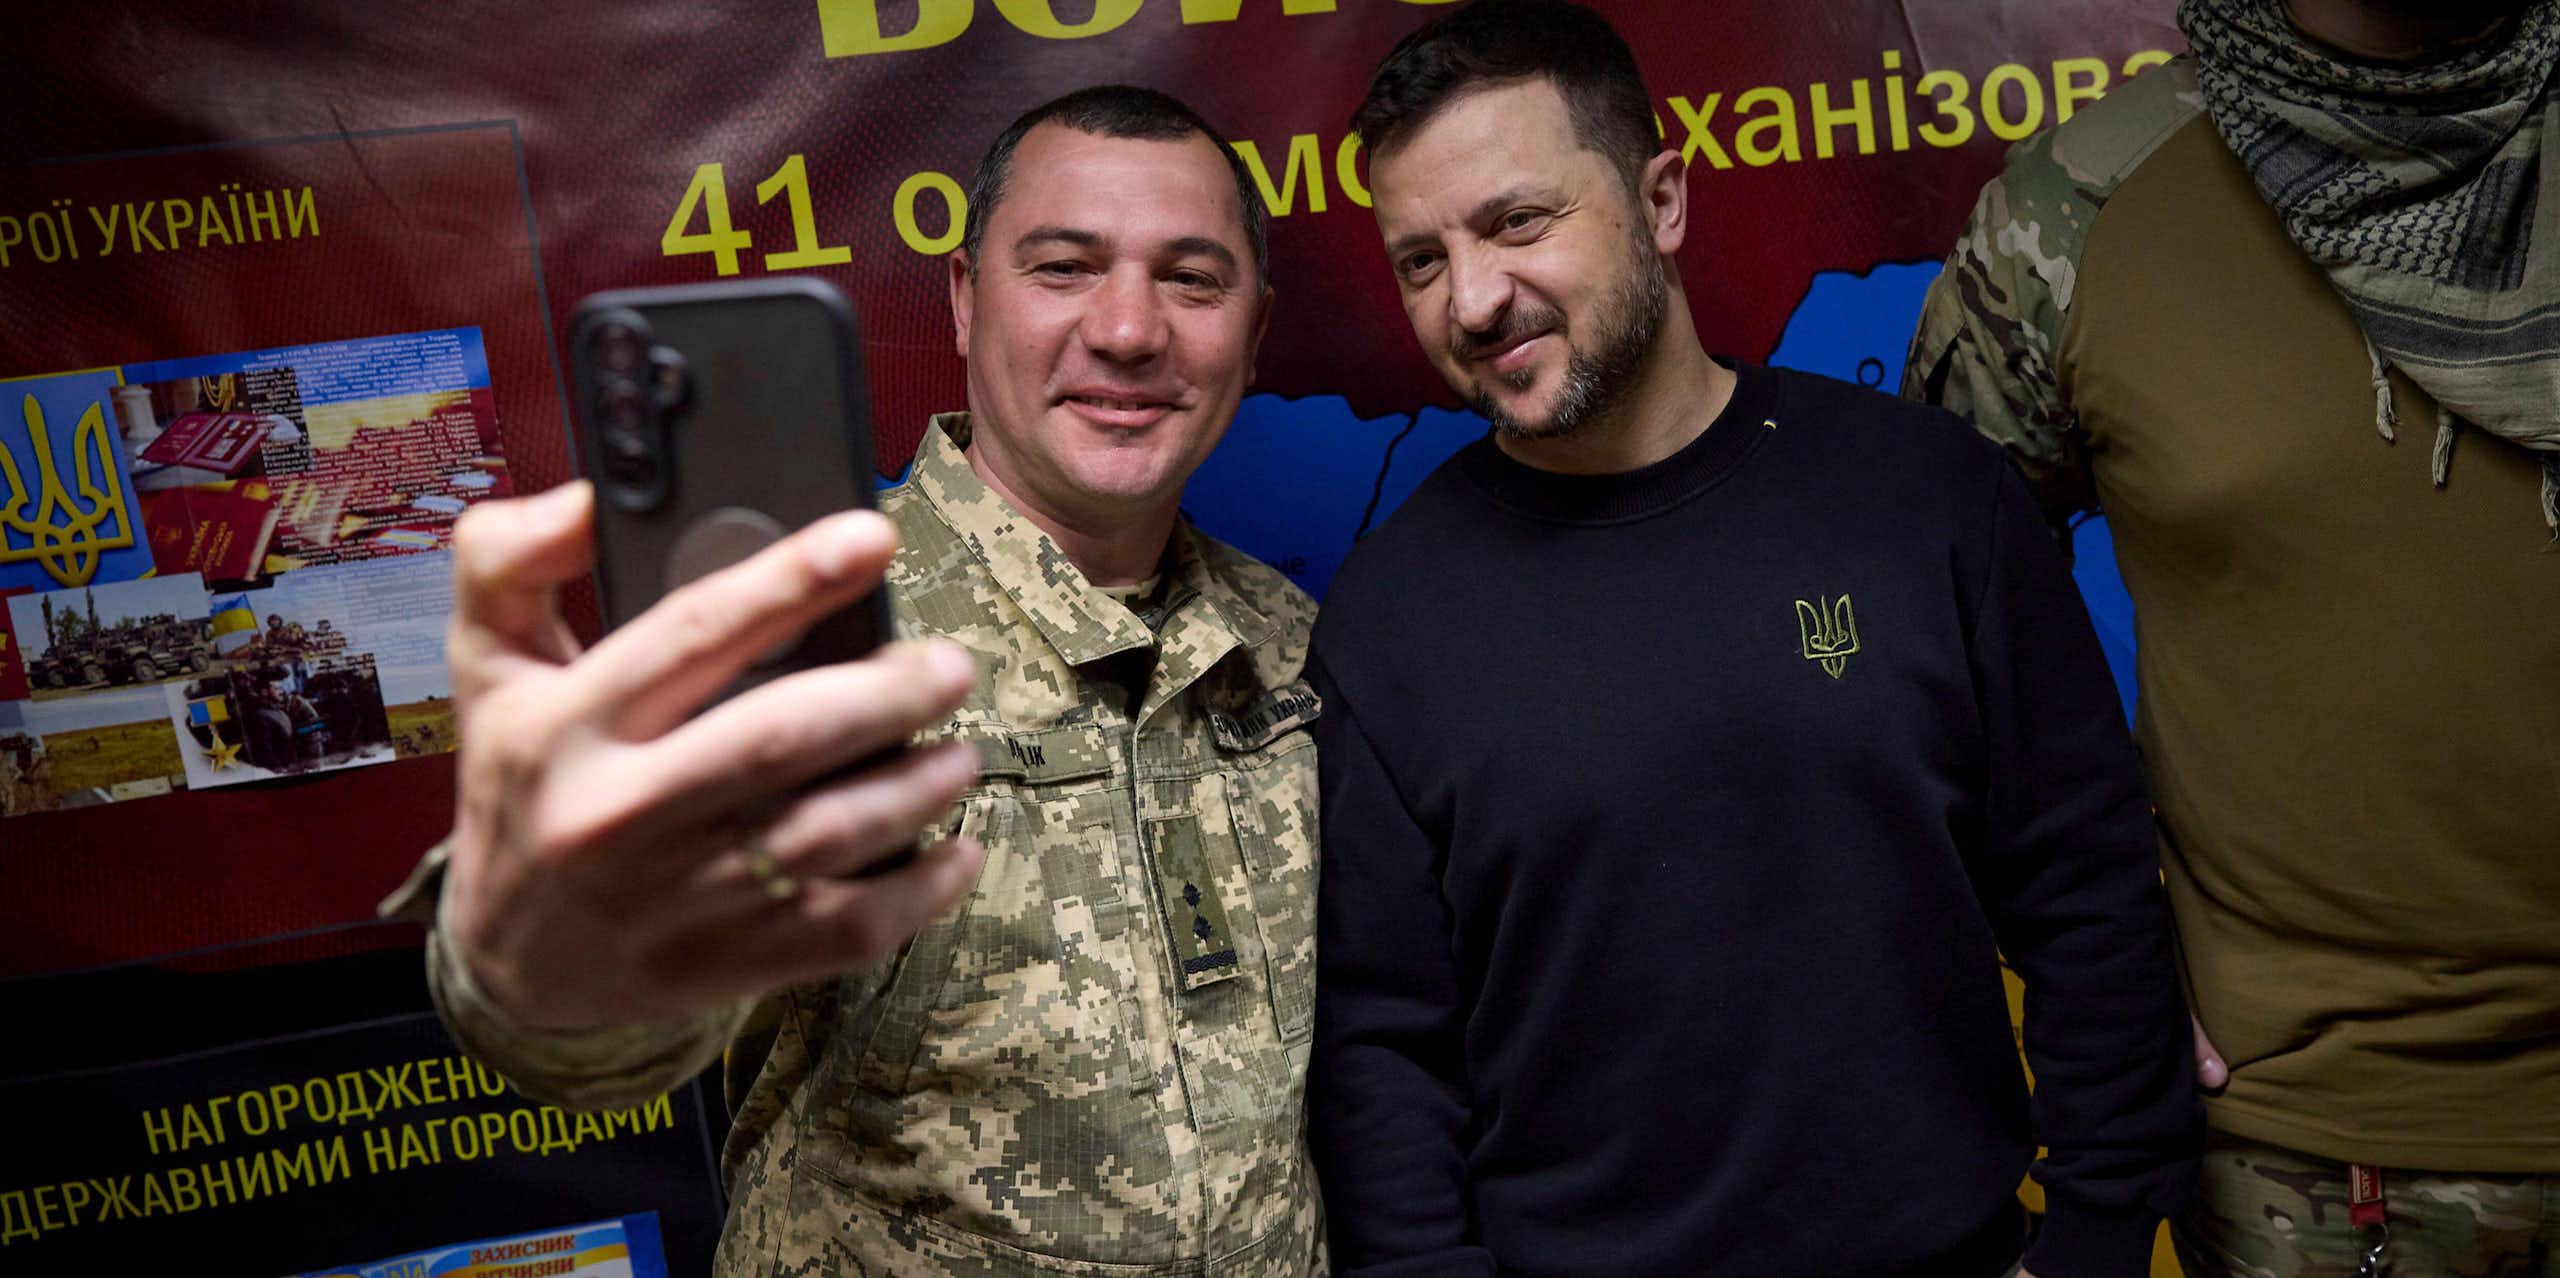 A Ukrainian soldier takes a selfie with VOlodymyr Zelensky, May 2024.